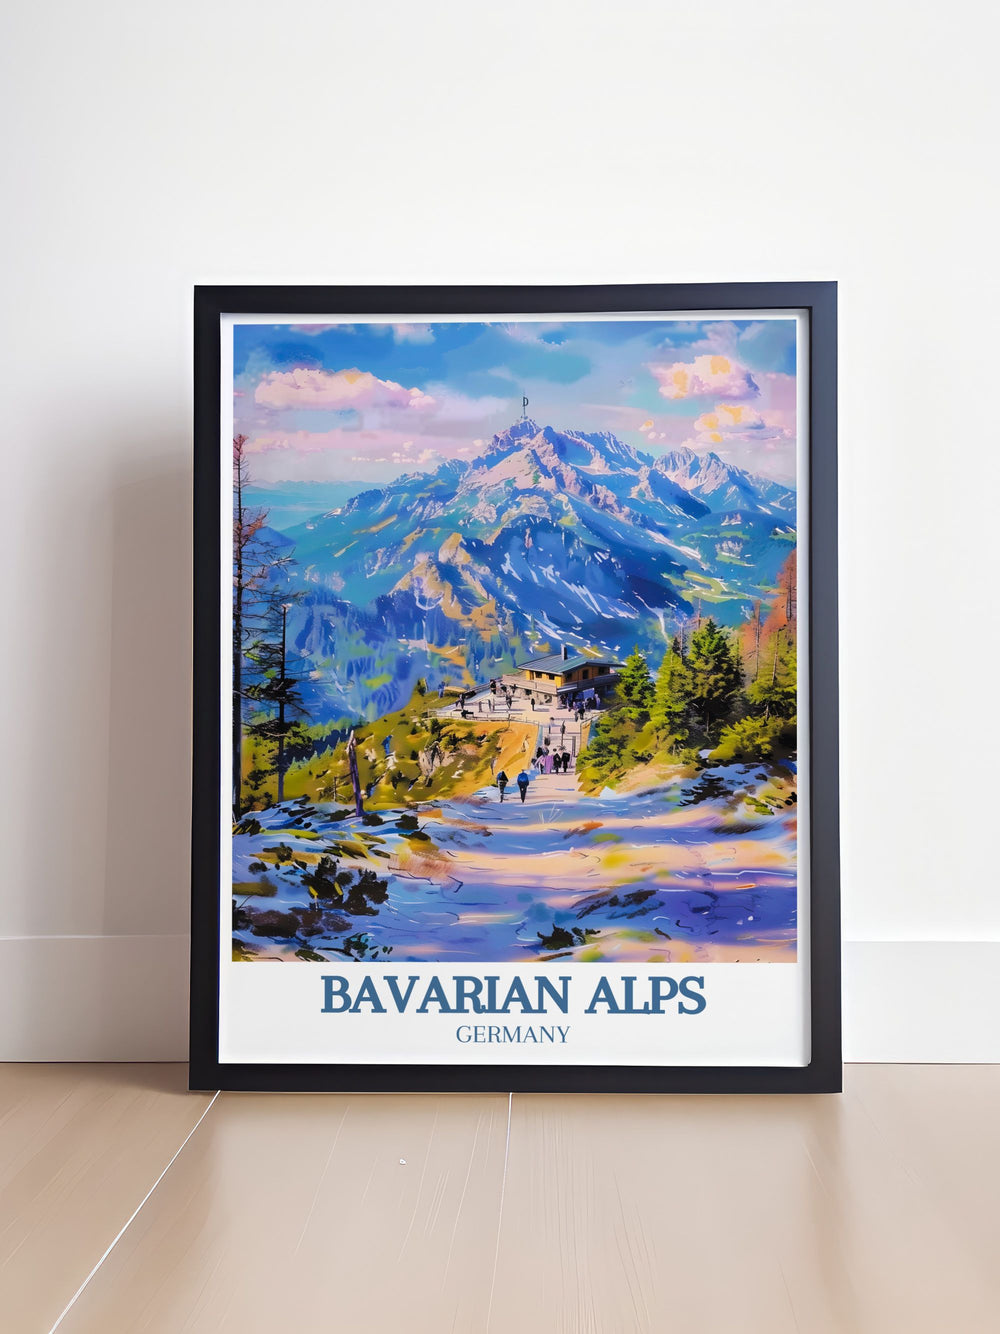 Exquisite Germany print highlighting the stunning landscapes of the Bavarian Alps and the iconic Eagles Nest, perfect for nature enthusiasts and travel art lovers. Adds a scenic and serene touch to your home decor.